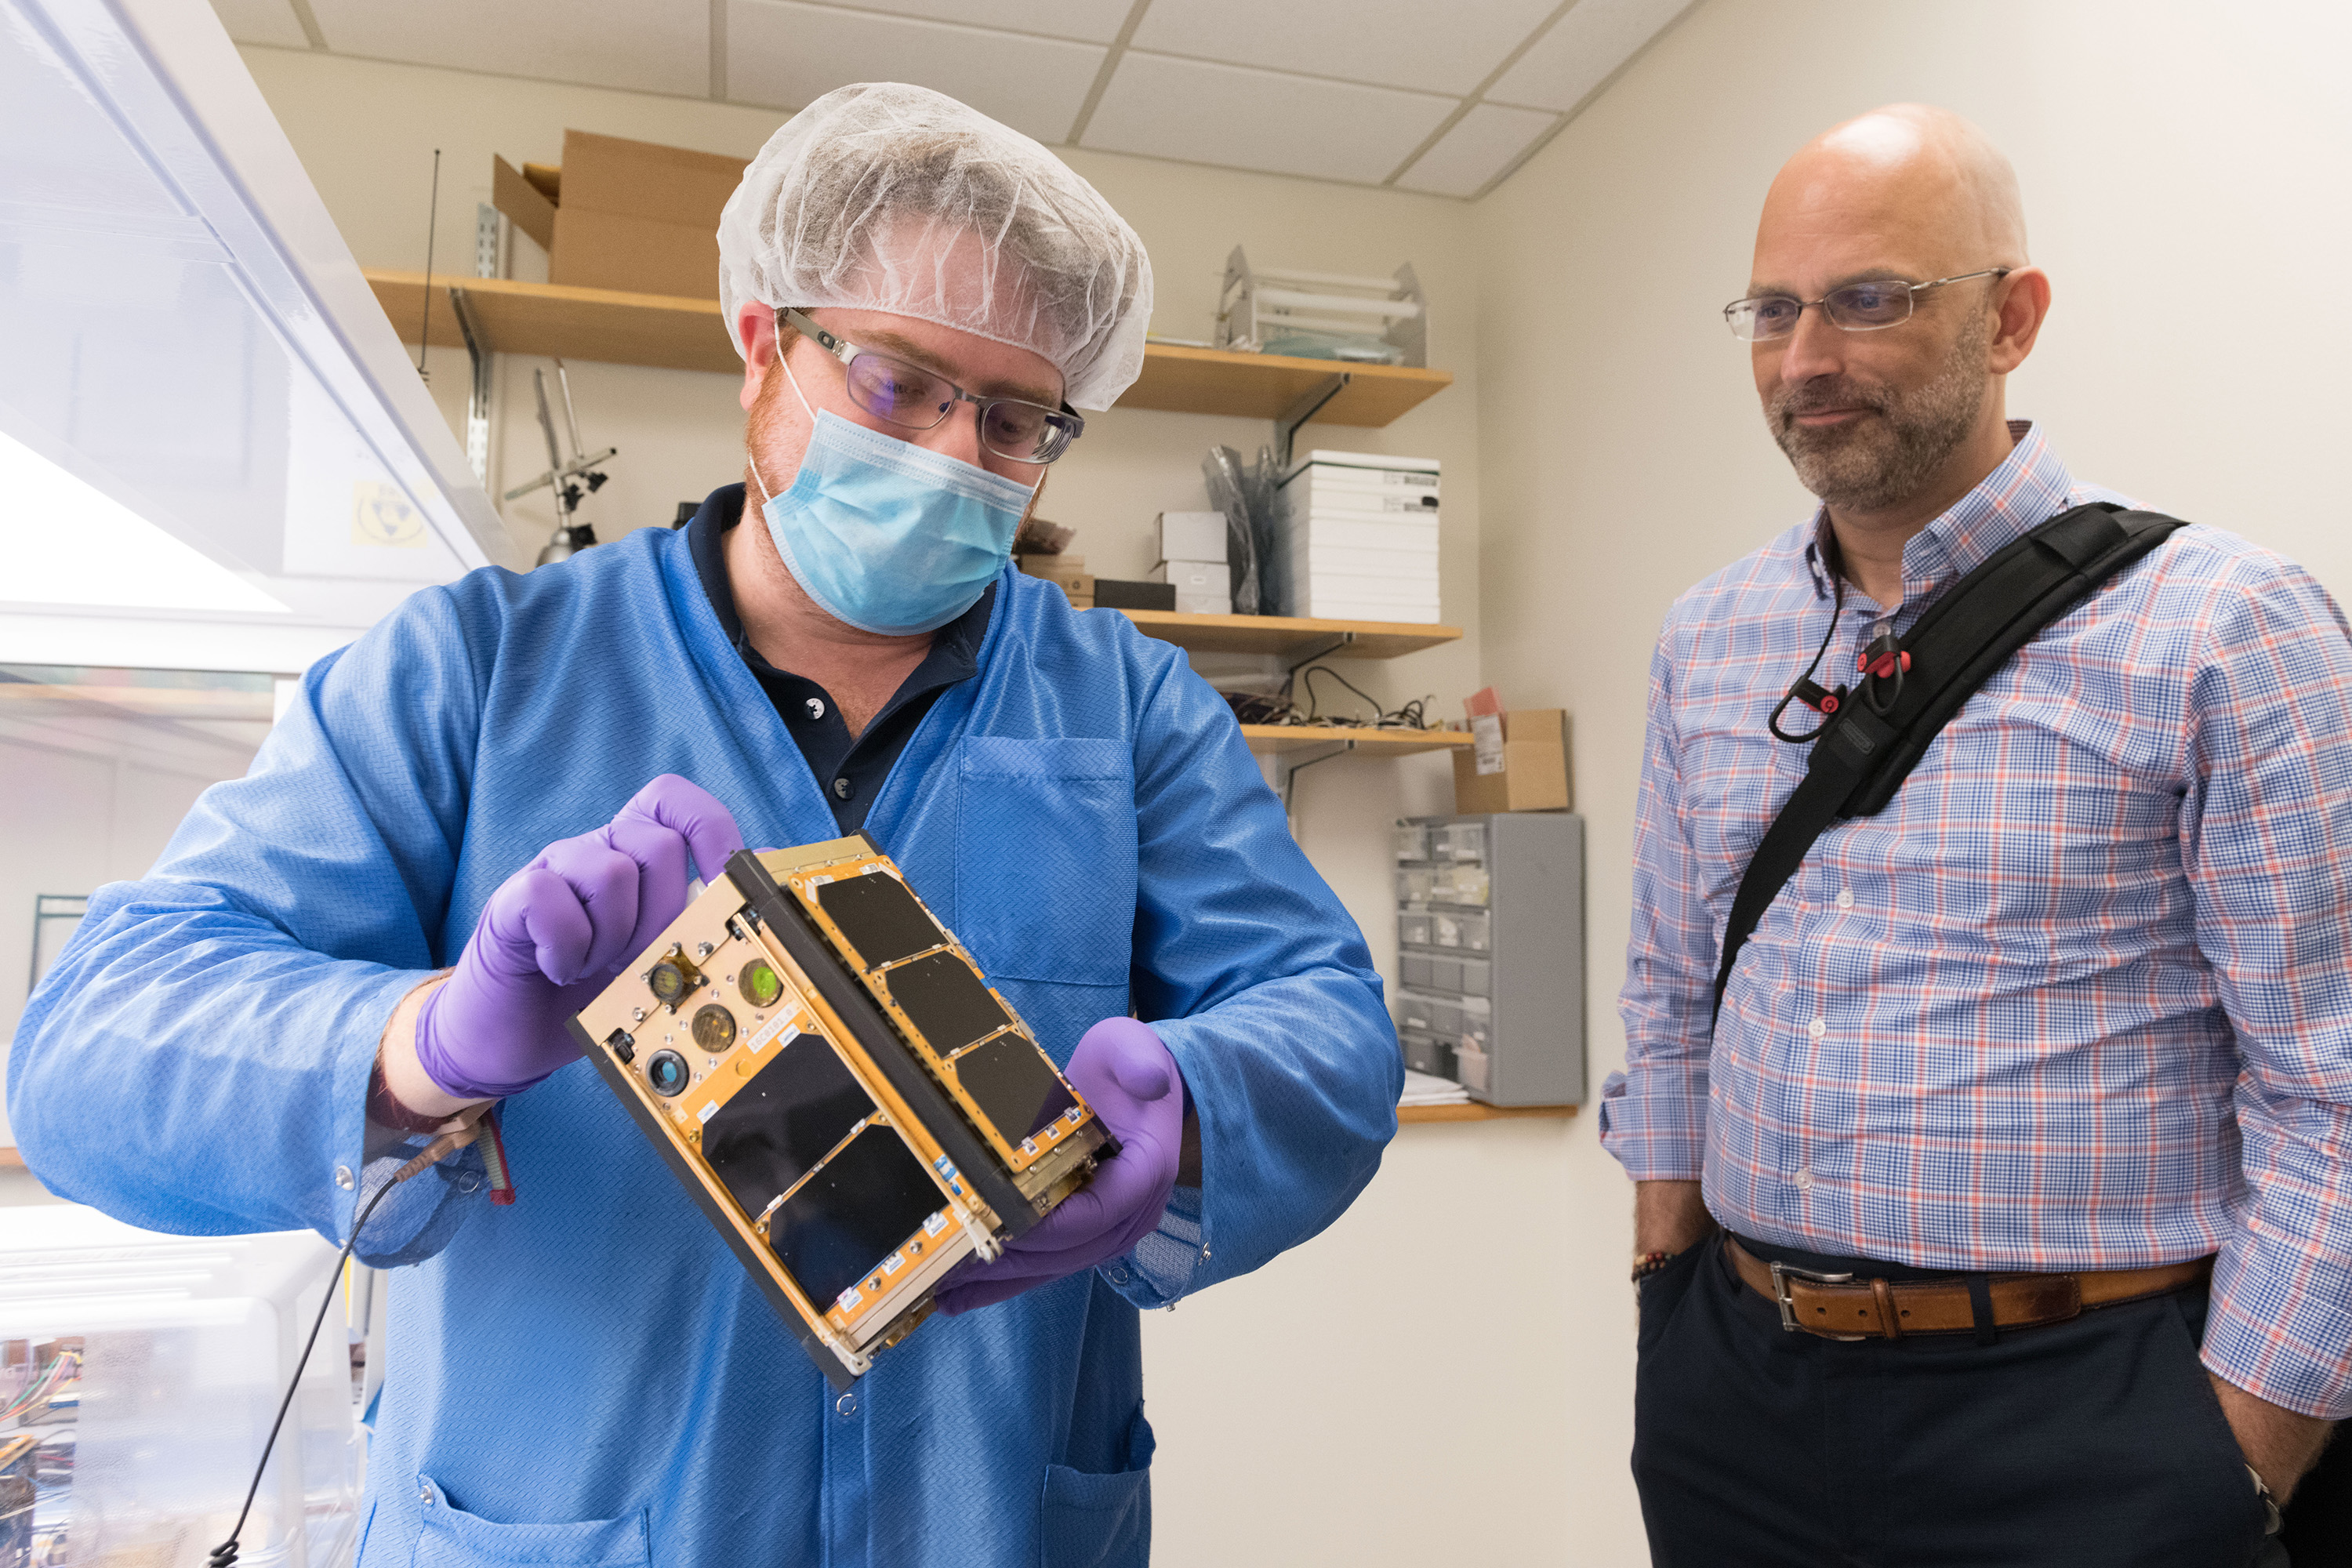 Georgia Tech aerospace engineering graduate student Byron Davis shows Xenesis CEO Mark LaPenna one of the RANGE CubeSats scheduled to go into orbit later this fall. (Credit: Allison Carter, Georgia Tech)